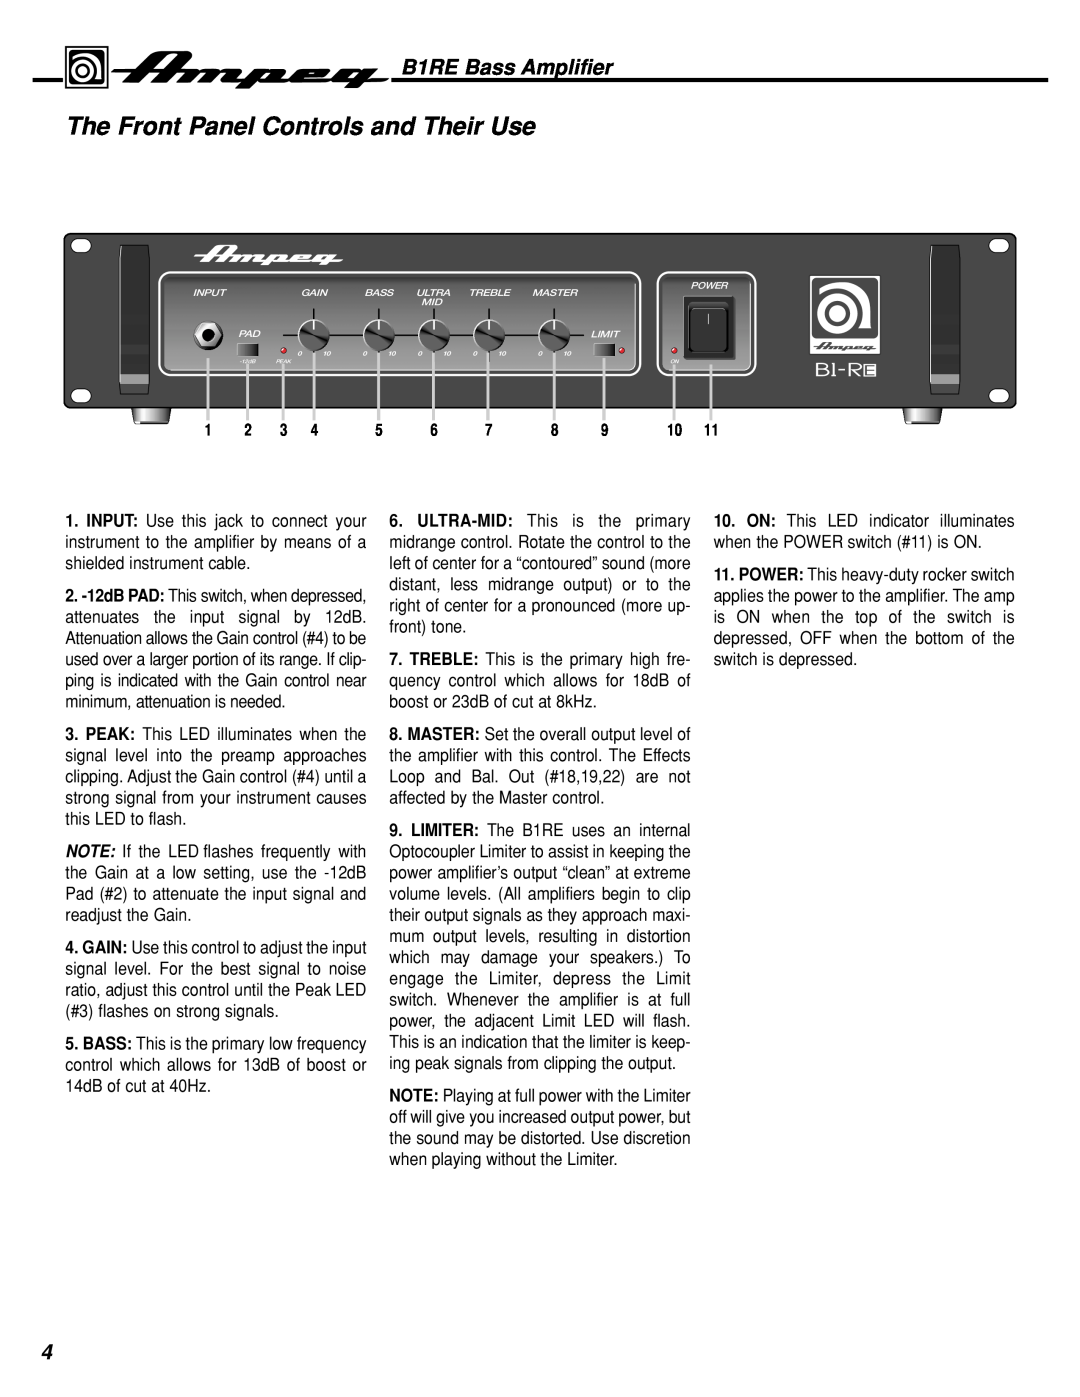 Ampeg manual The Front Panel Controls and Their Use, B1RE Bass Amplifier 